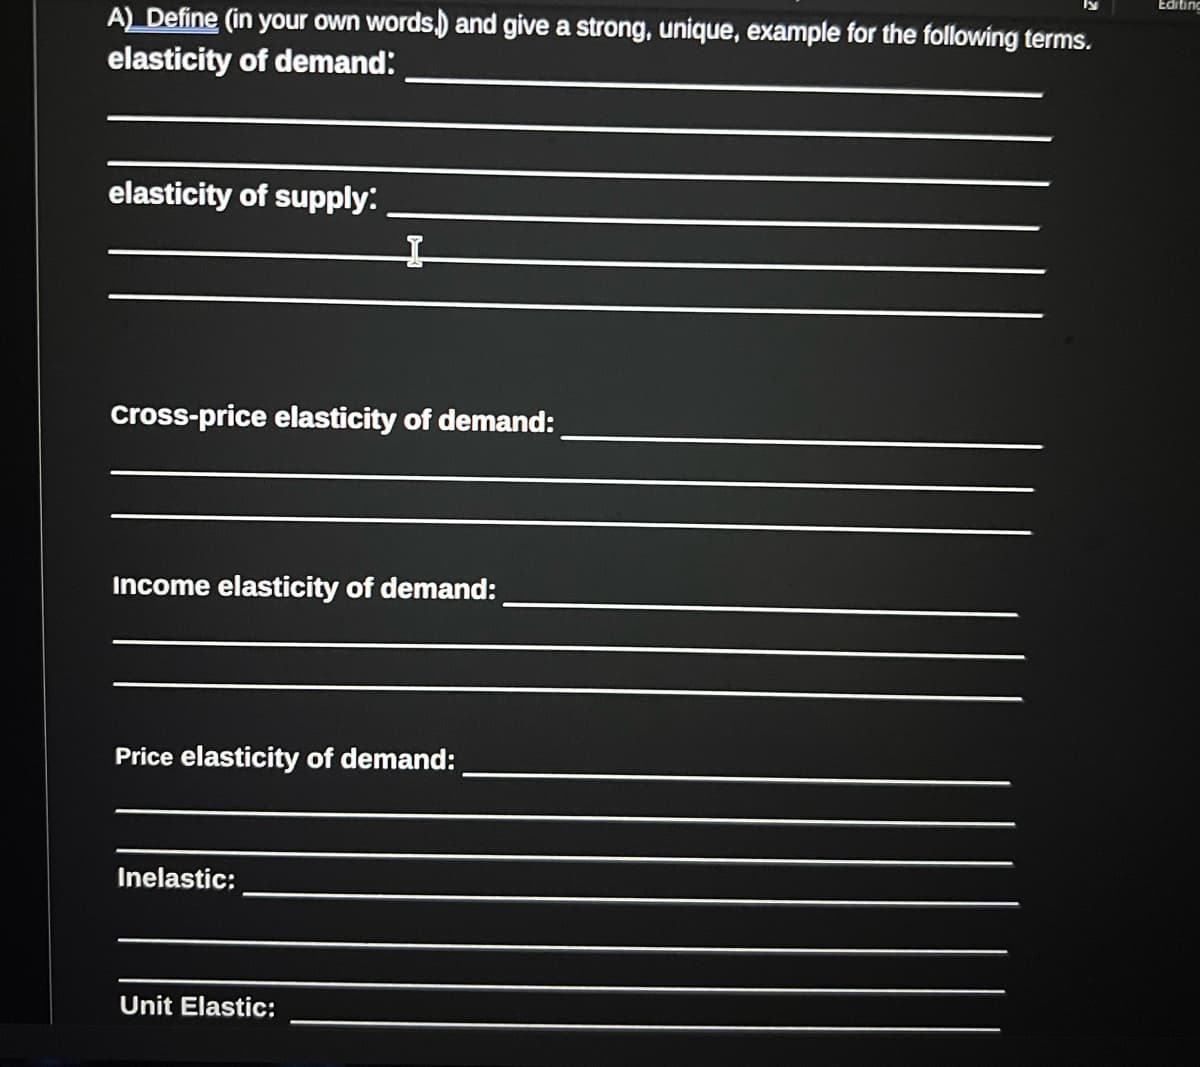 A) Define (in your own words,) and give a strong, unique, example for the following terms.
elasticity of demand:
elasticity of supply:
I
cross-price elasticity of demand:
Income elasticity of demand:
Price elasticity of demand:
Inelastic:
Unit Elastic:
Editing